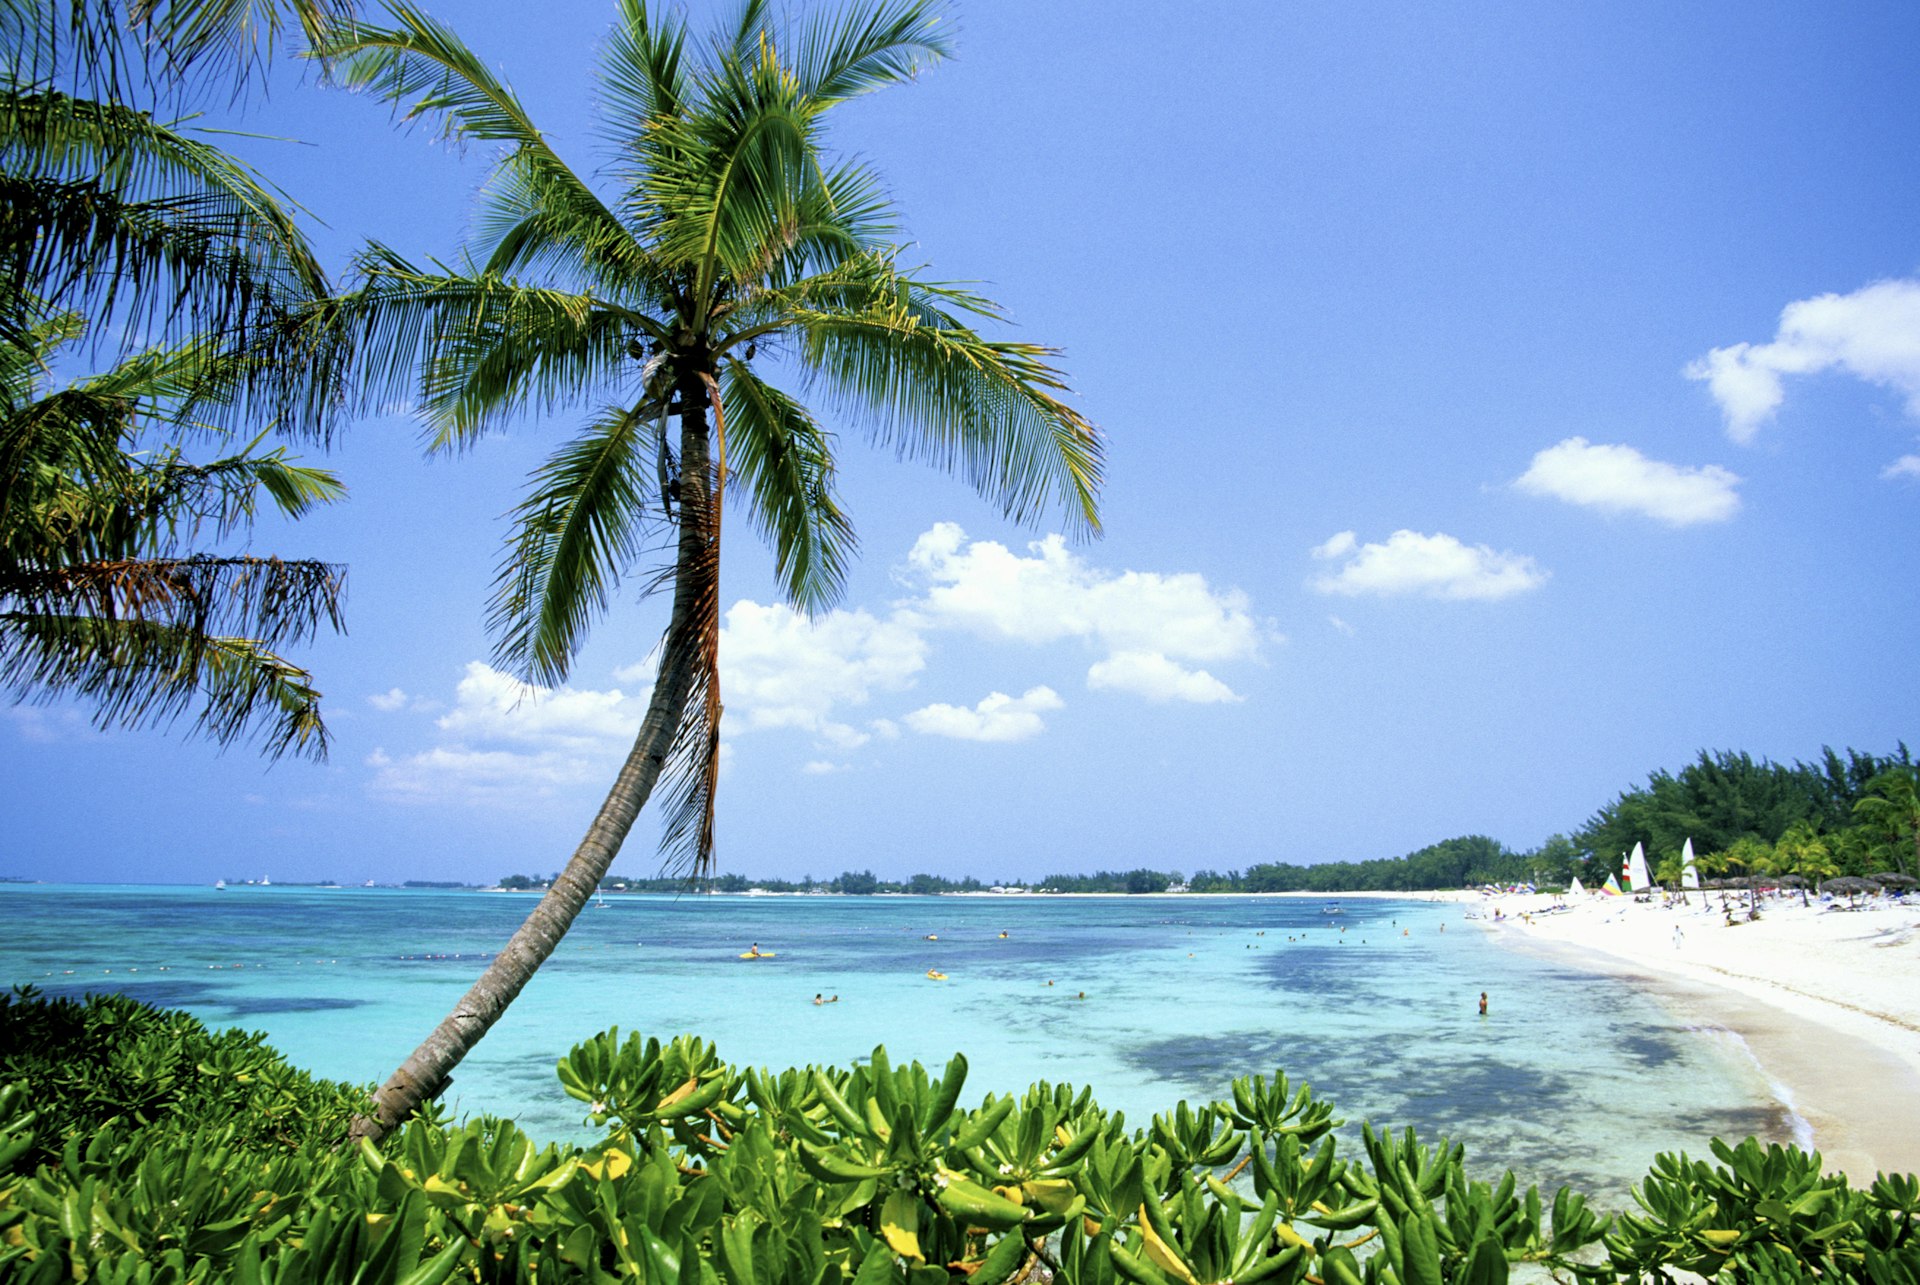 A palm tree-lined beach with windsurfing boards on white sand